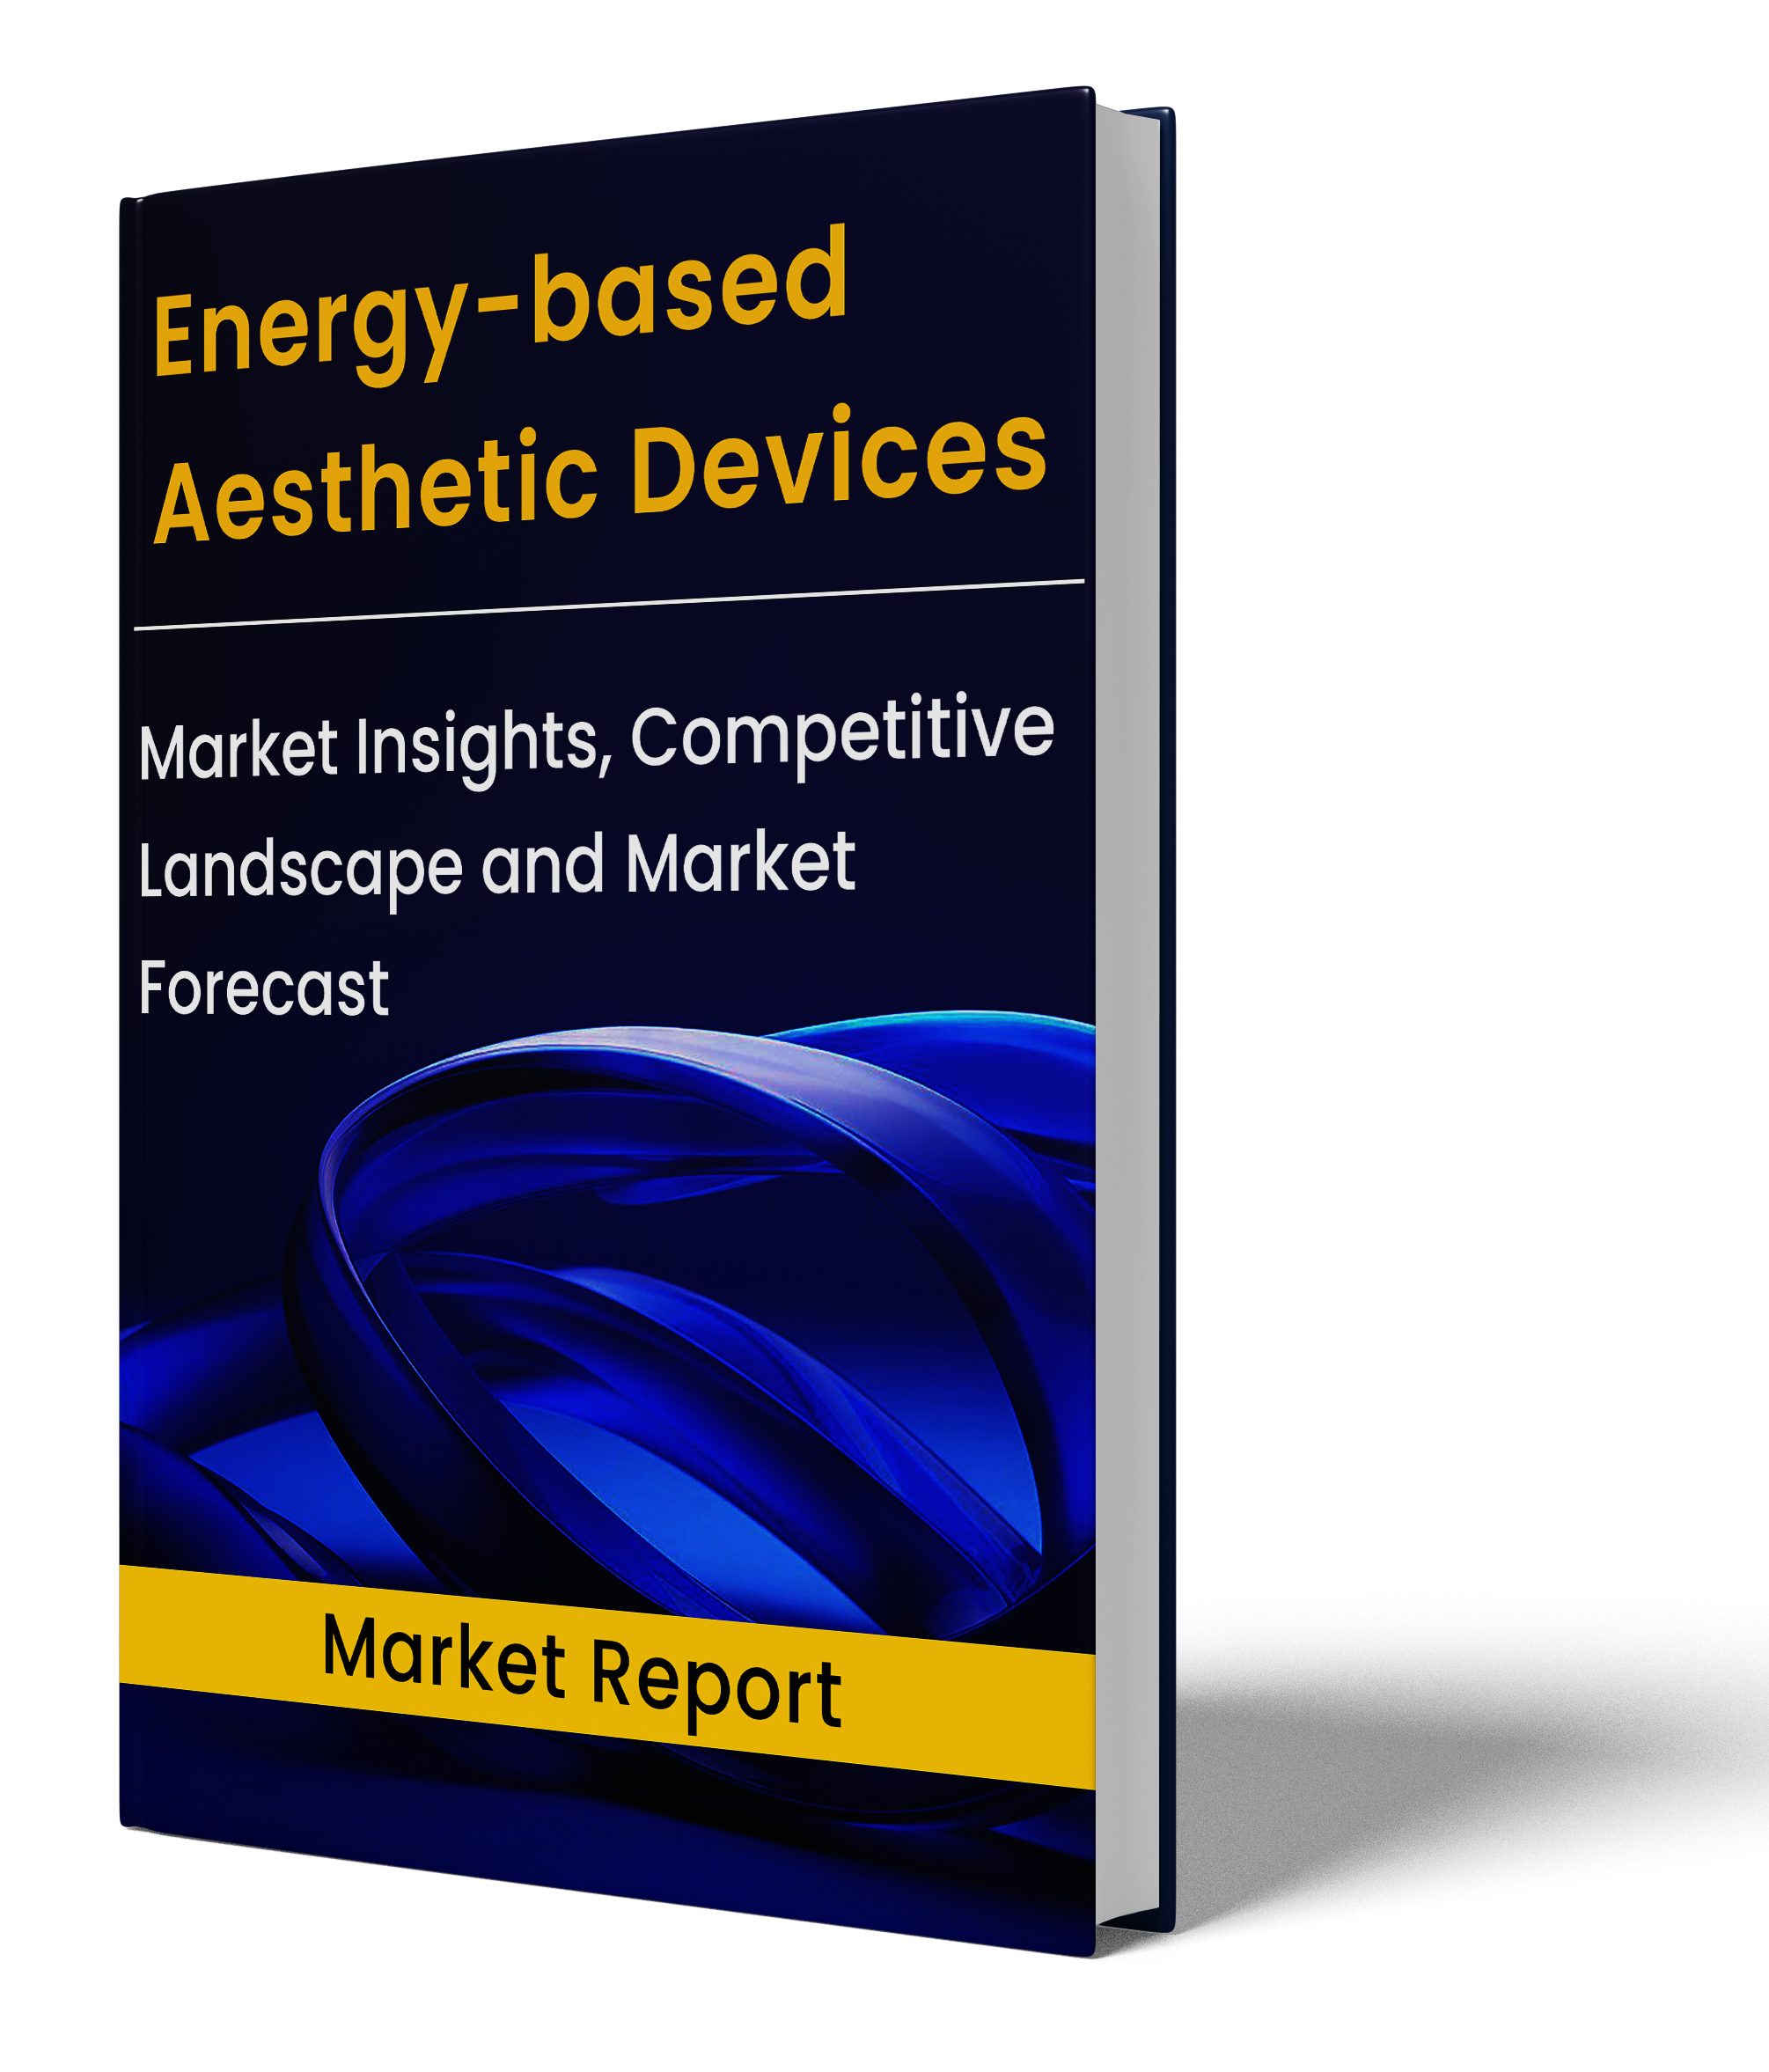 Energy-based Aesthetic Devices Market Report